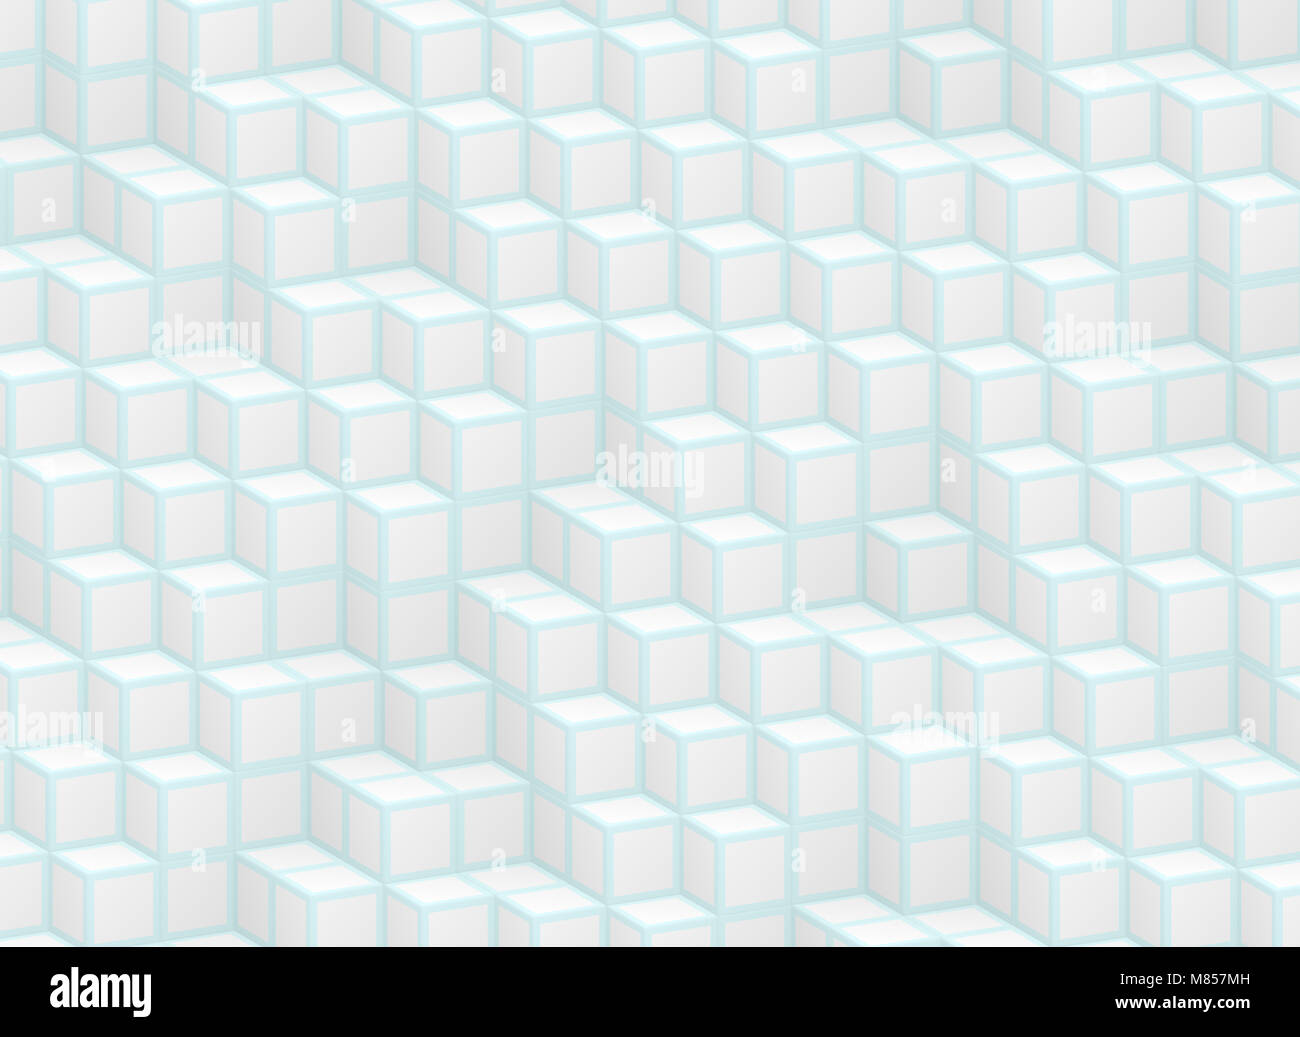 White and blue blocks 3d pattern Stock Photo